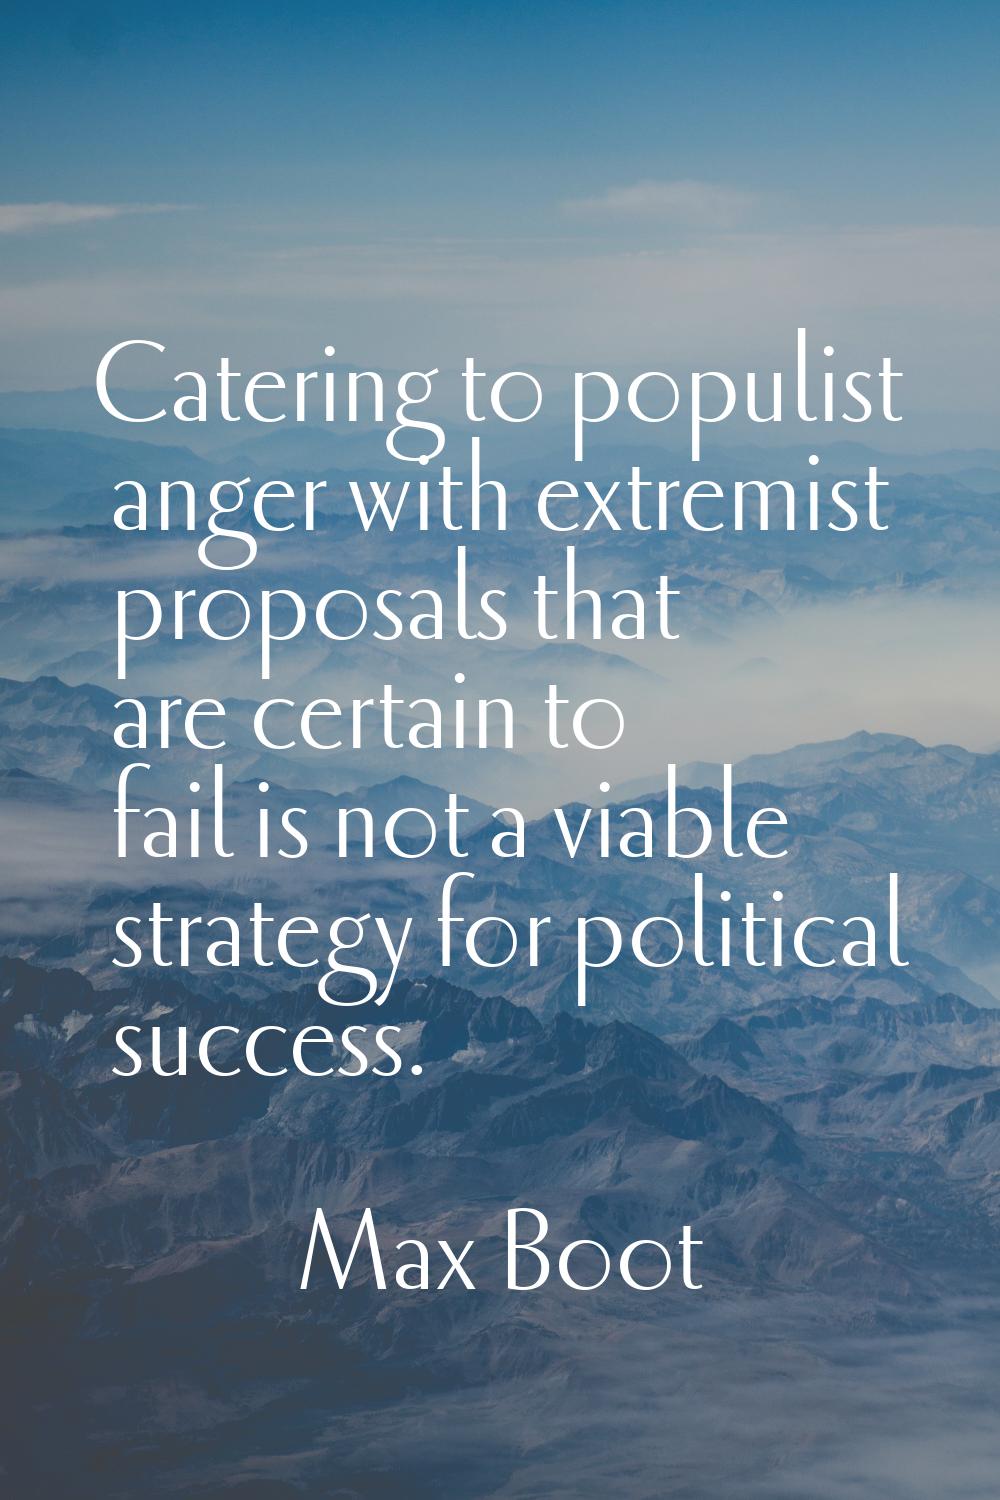 Catering to populist anger with extremist proposals that are certain to fail is not a viable strate